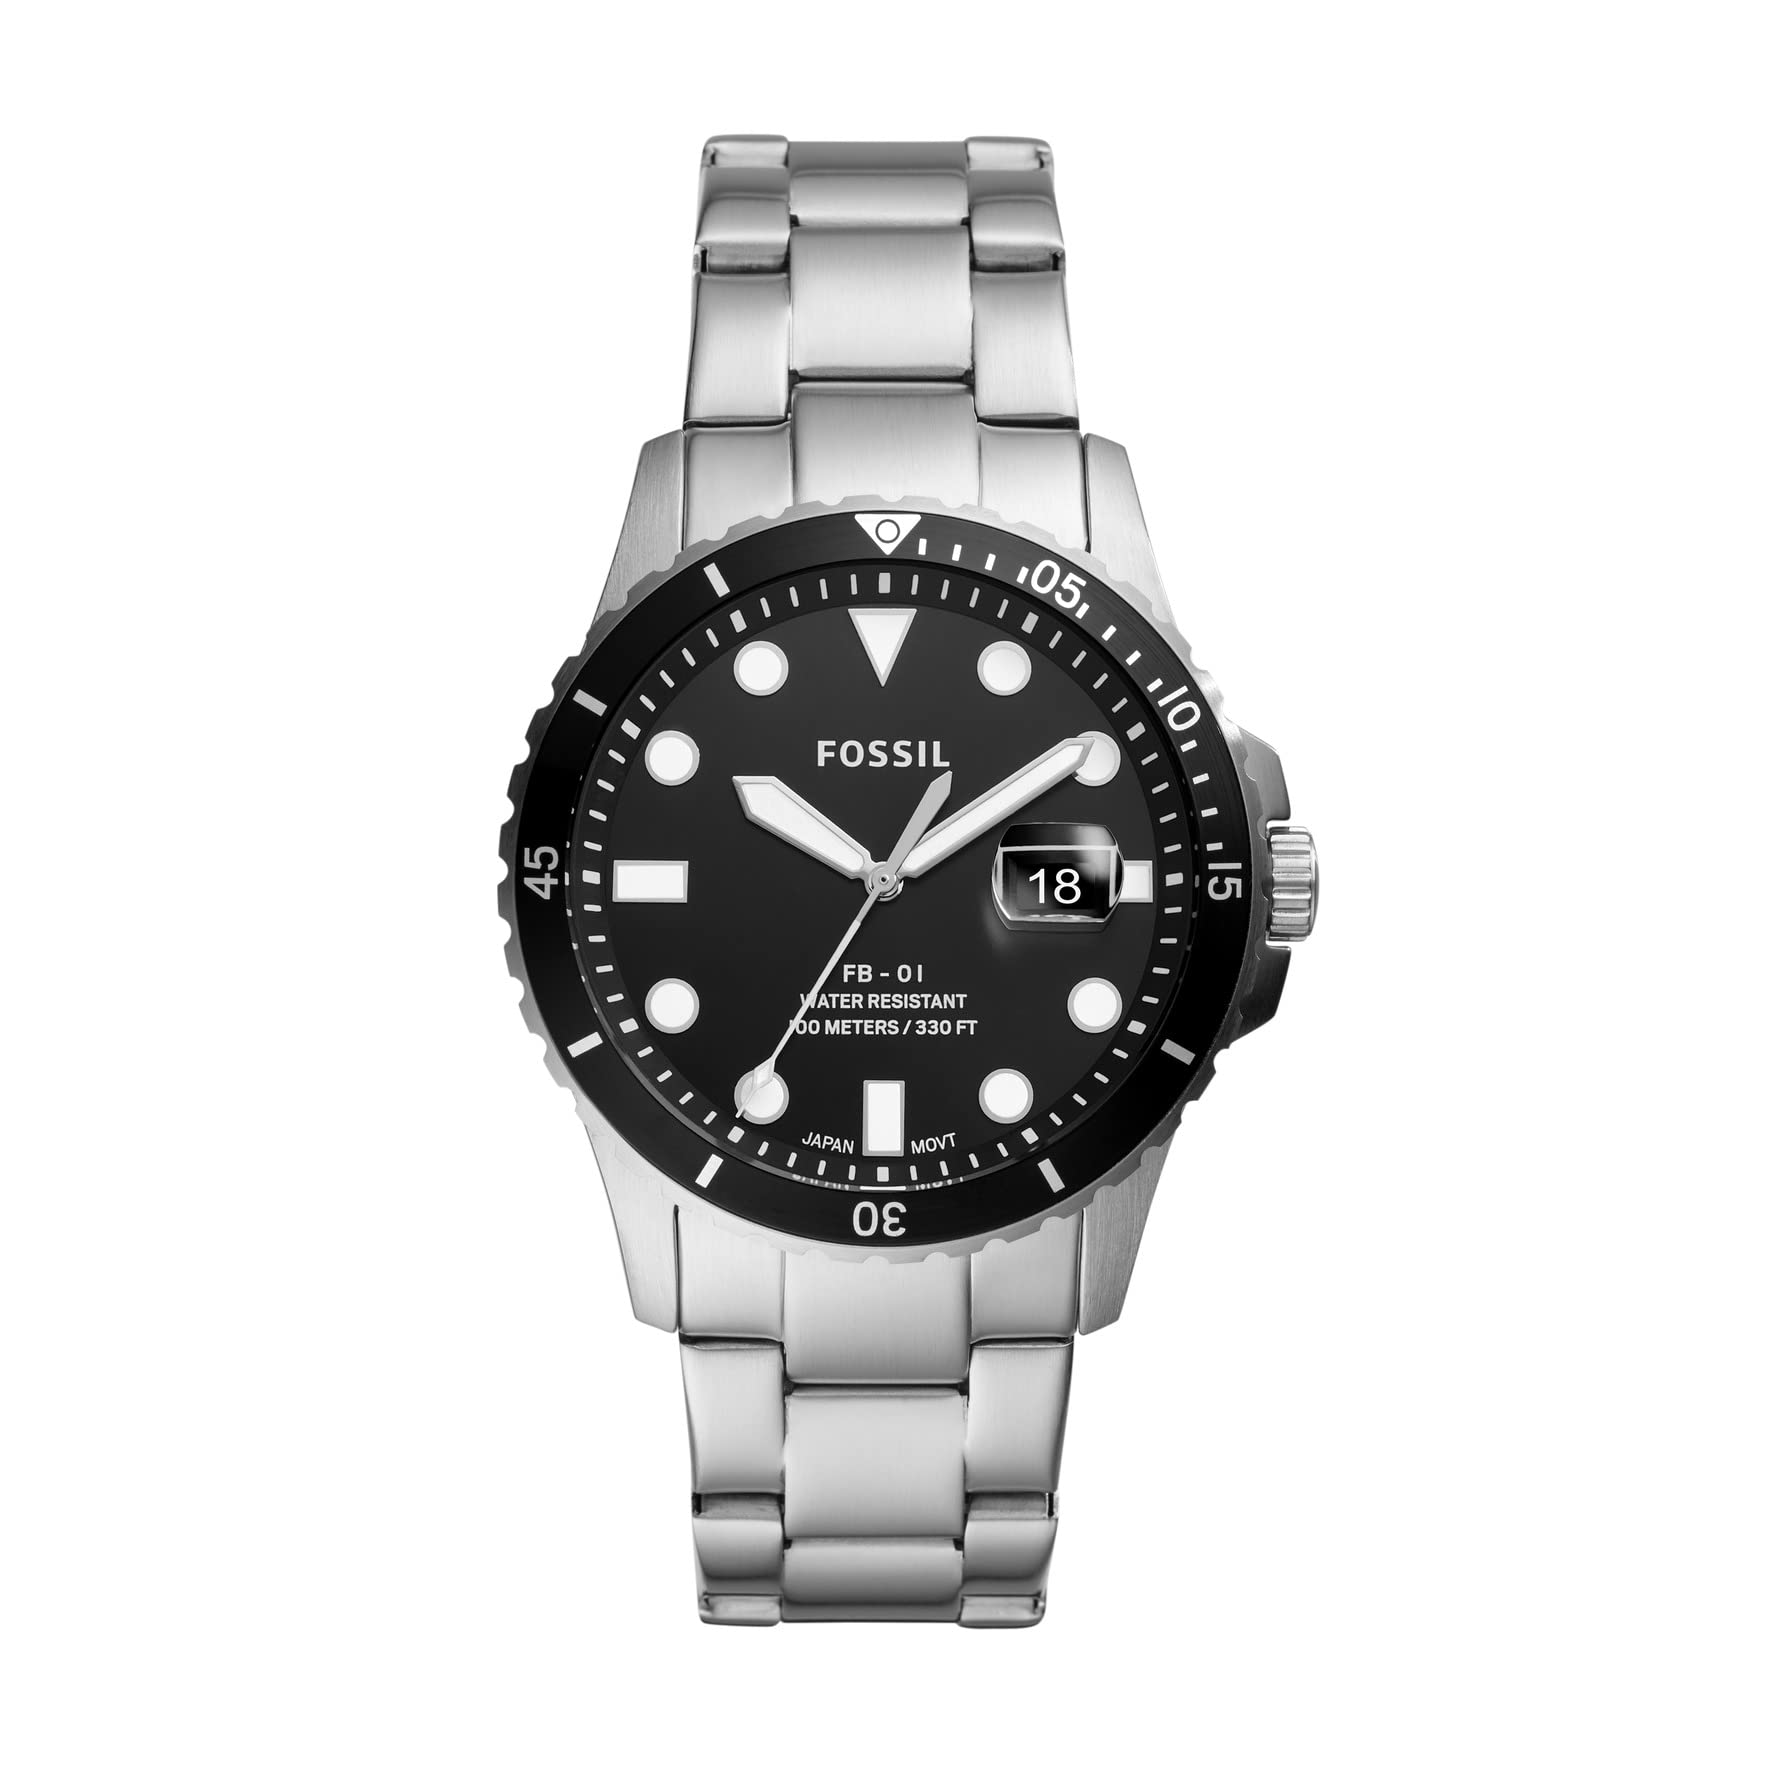 Fossil FB-01 Men's Dive-Inspired Sport Watch with Stainless Steel Bracelet Band